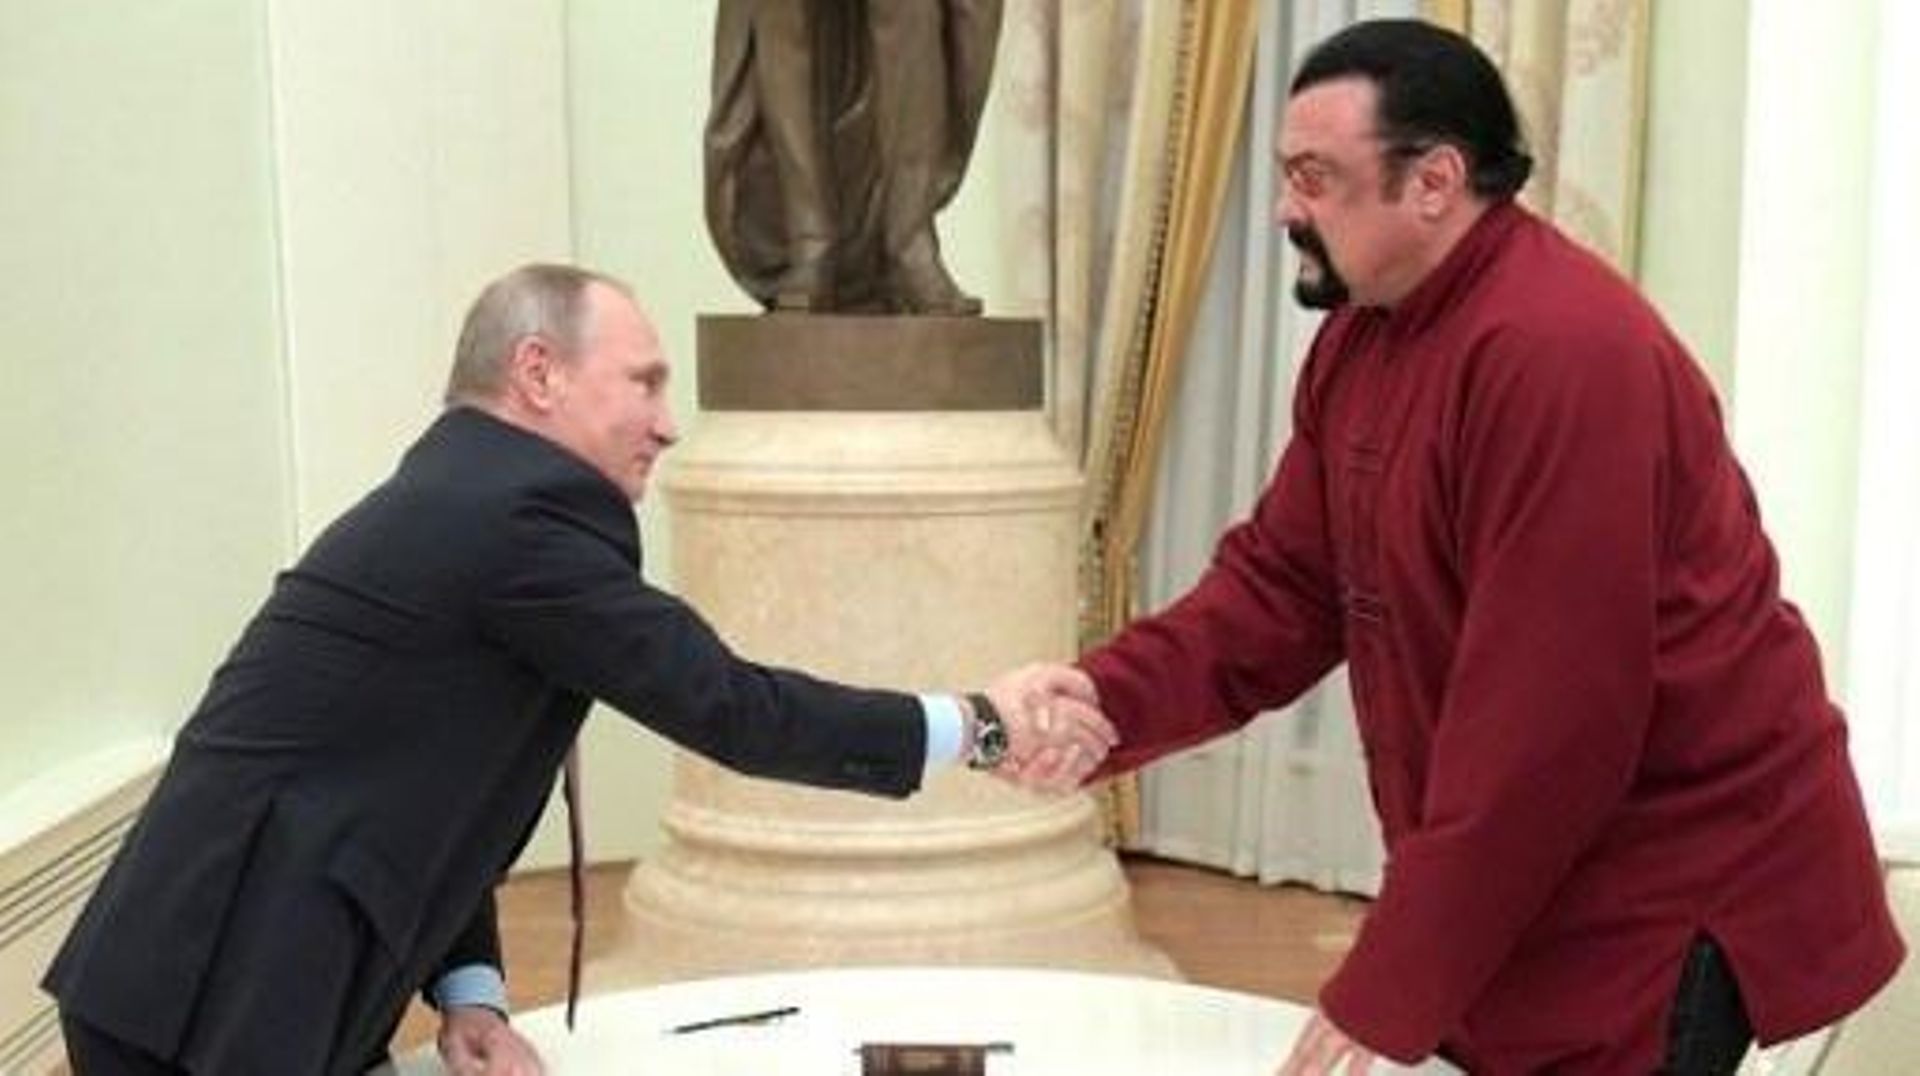 Russian President Vladimir Putin (L) shakes hands with US action hero actor Steven Seagal after presenting a Russian passport to him during a meeting at the Kremlin in Moscow on November 25, 2016.
Alexey DRUZHININ / SPUTNIK / AFP